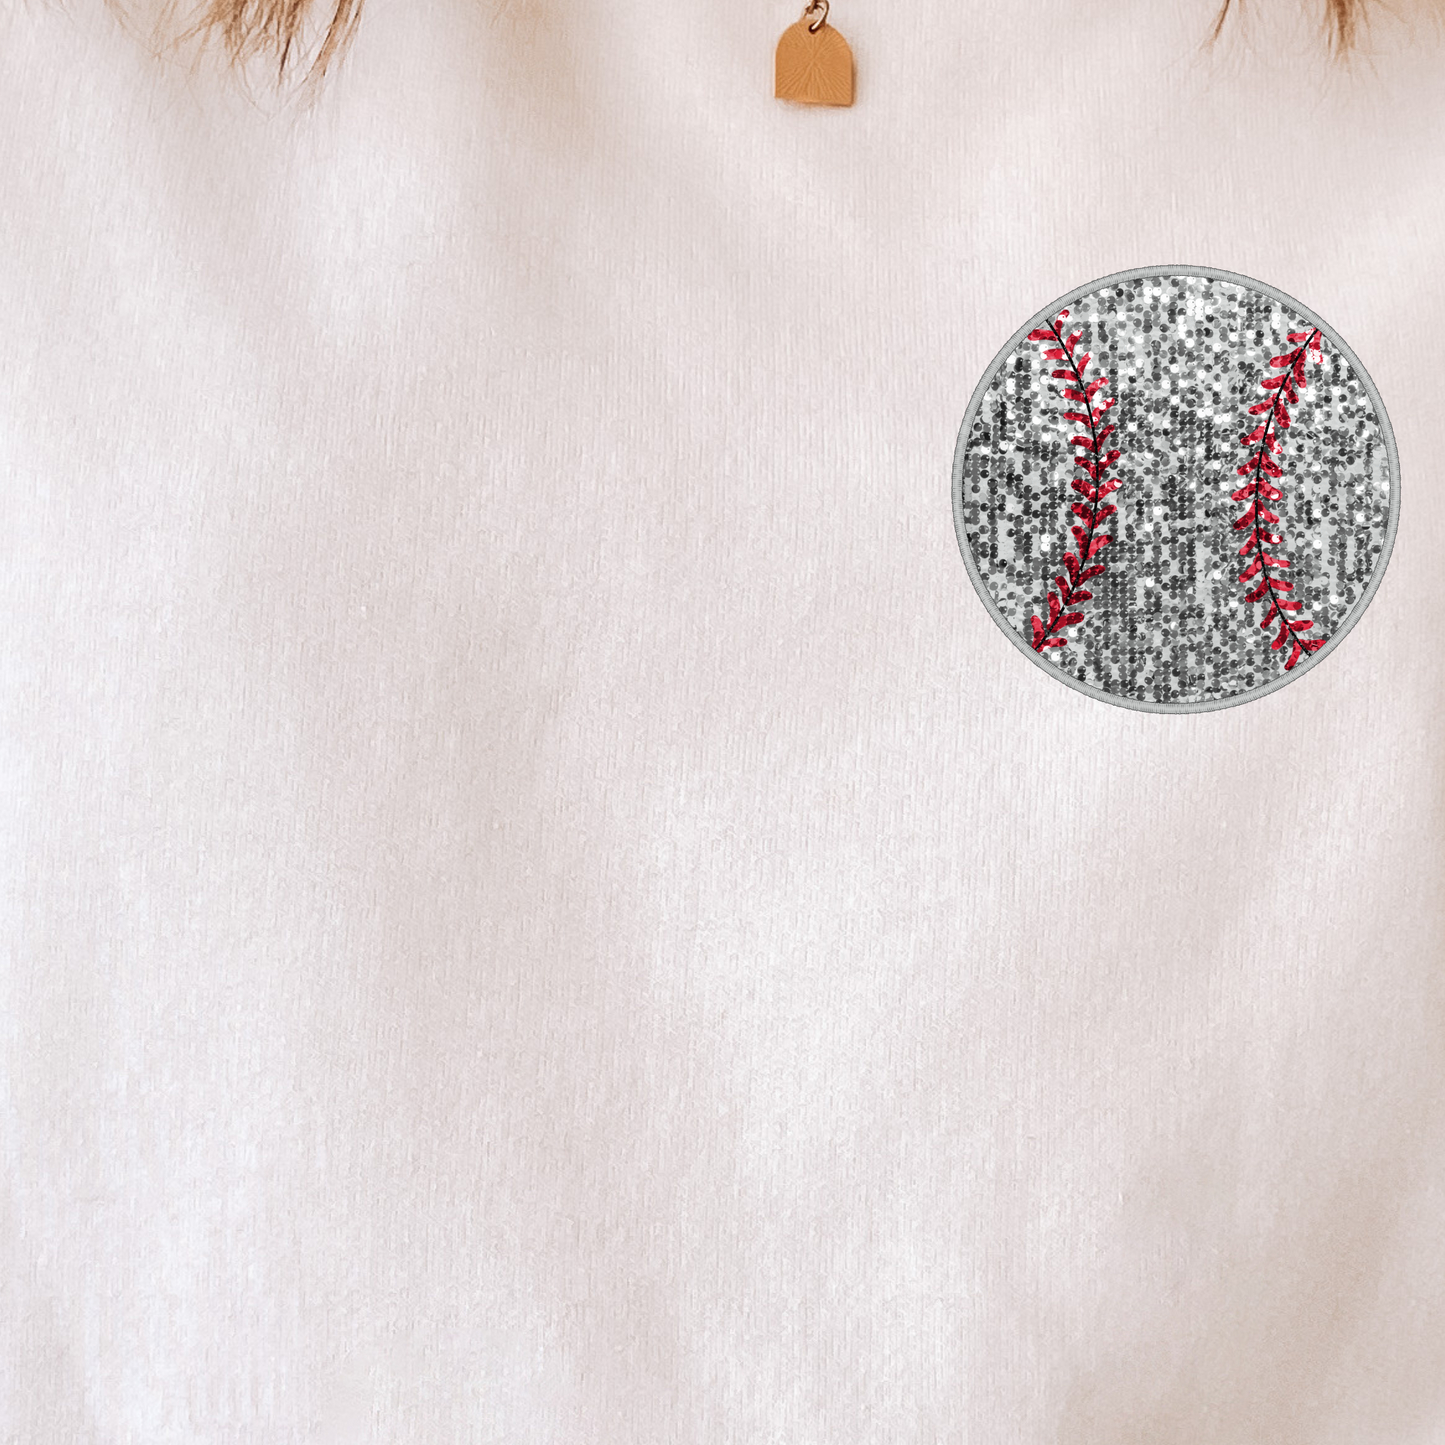 (shirt not included) Faux sequin Baseball Pocket - Clear Film Transfer